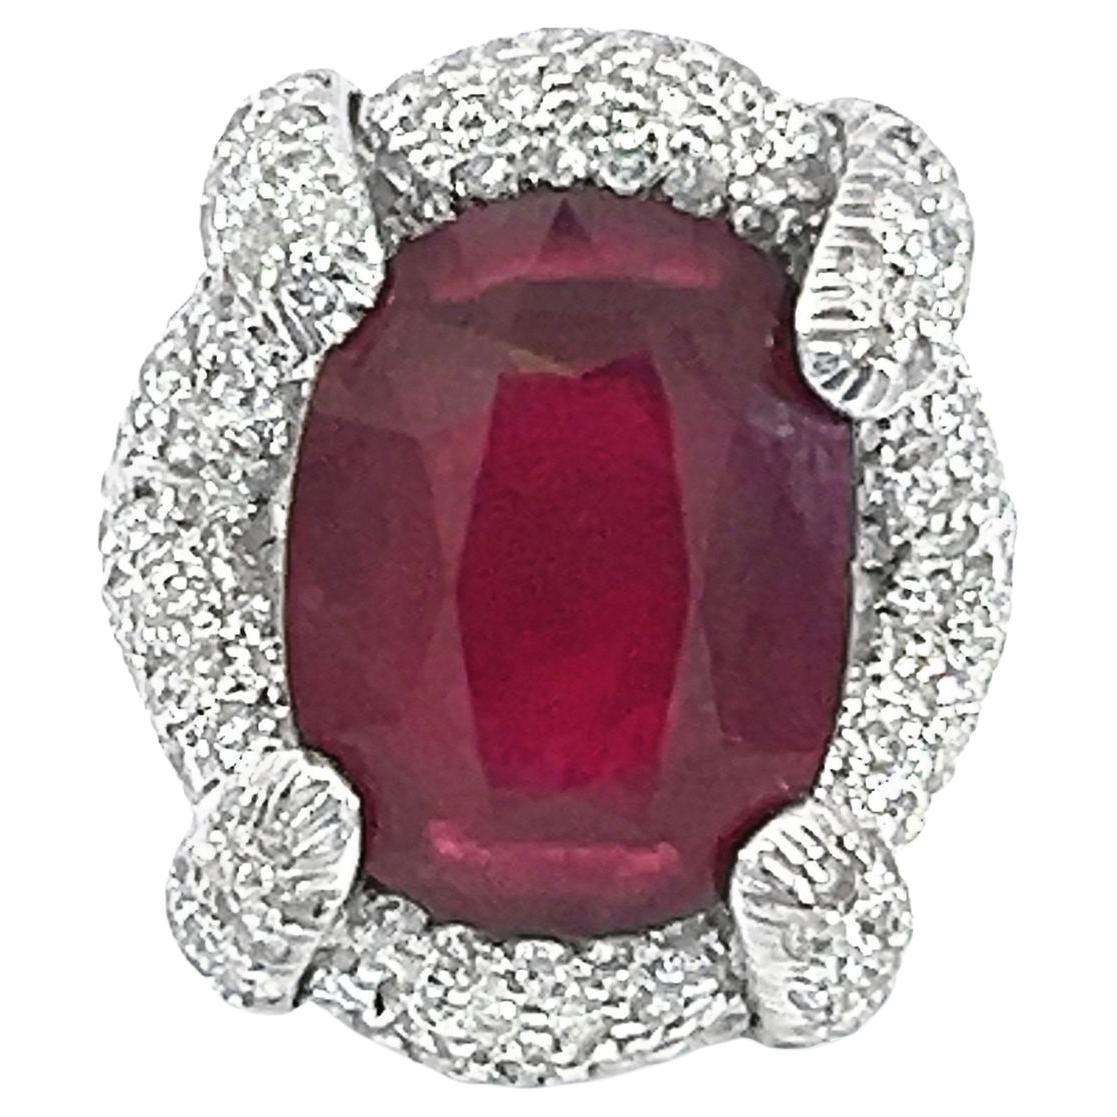 A beautiful natural glass filled Ruby Diamond ring set in 18Kt gold For Sale